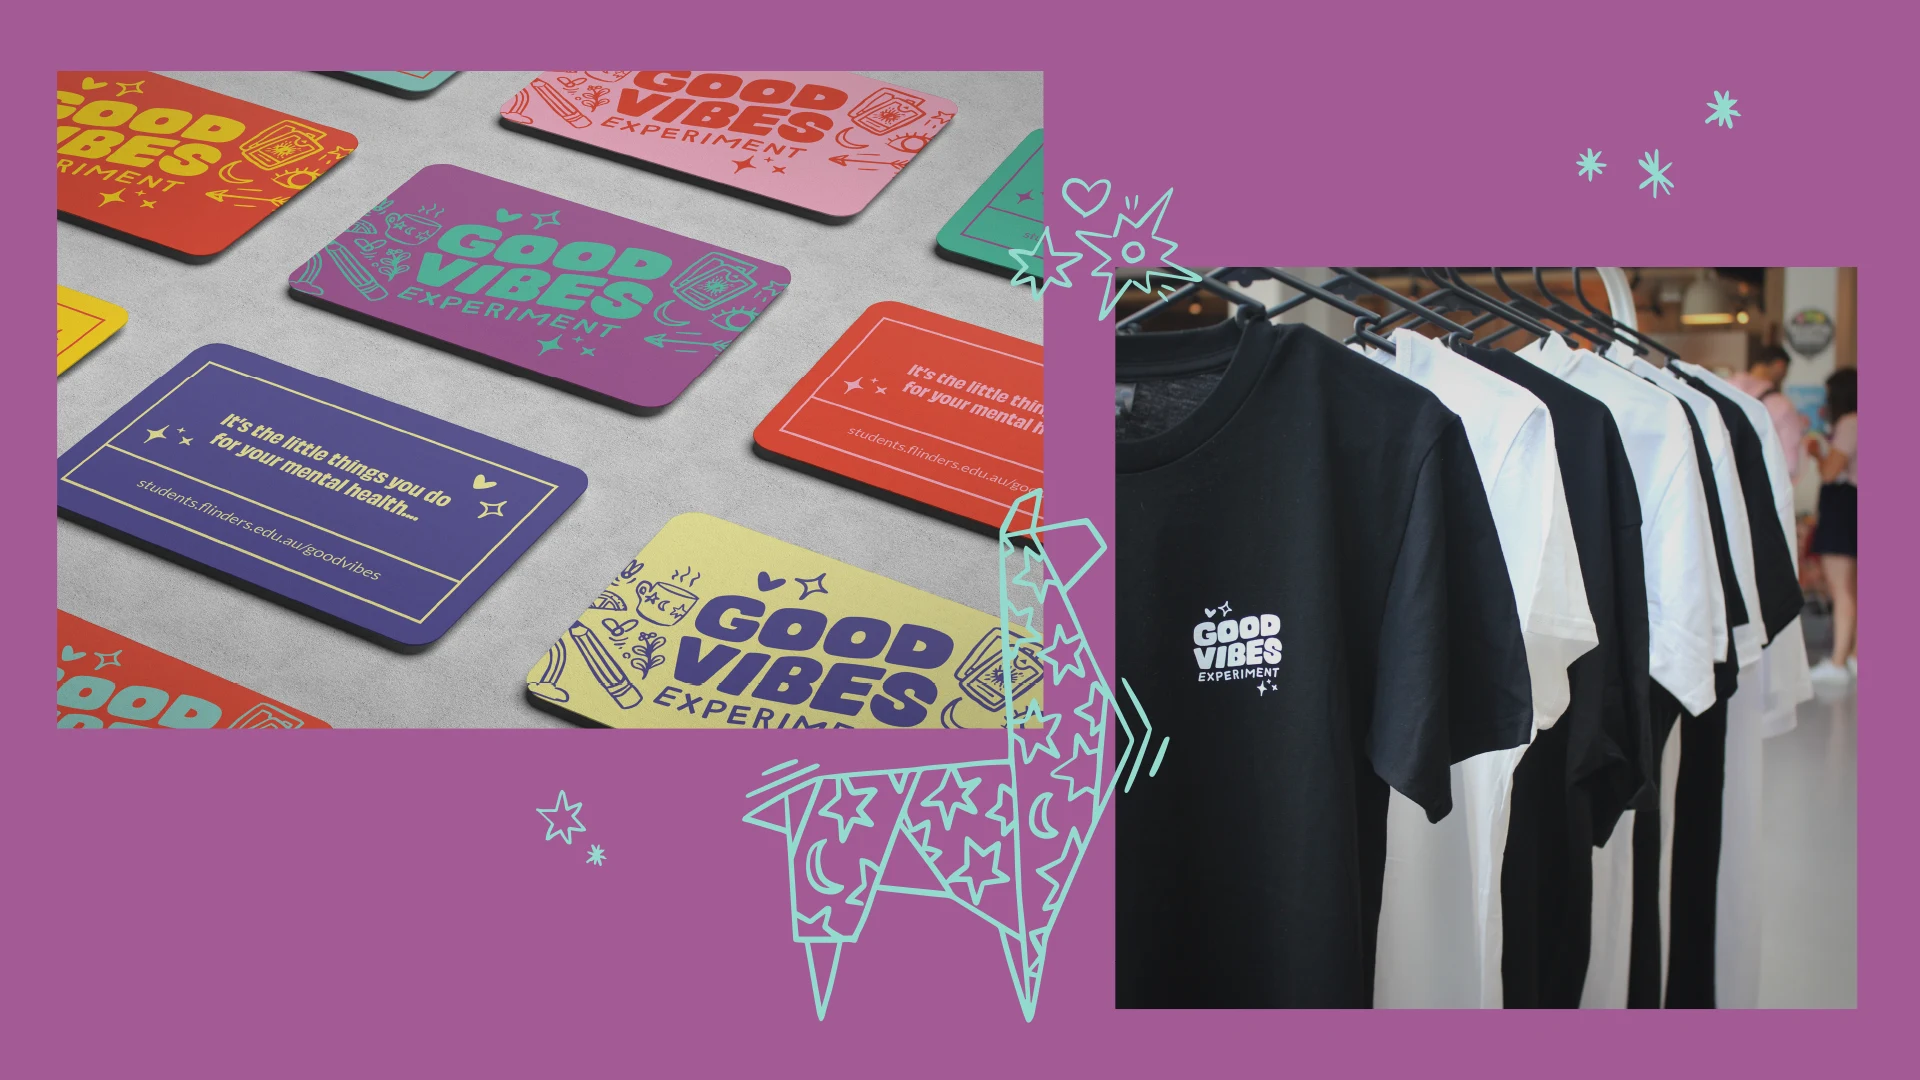 Good Vibes Experiment business cards and tees